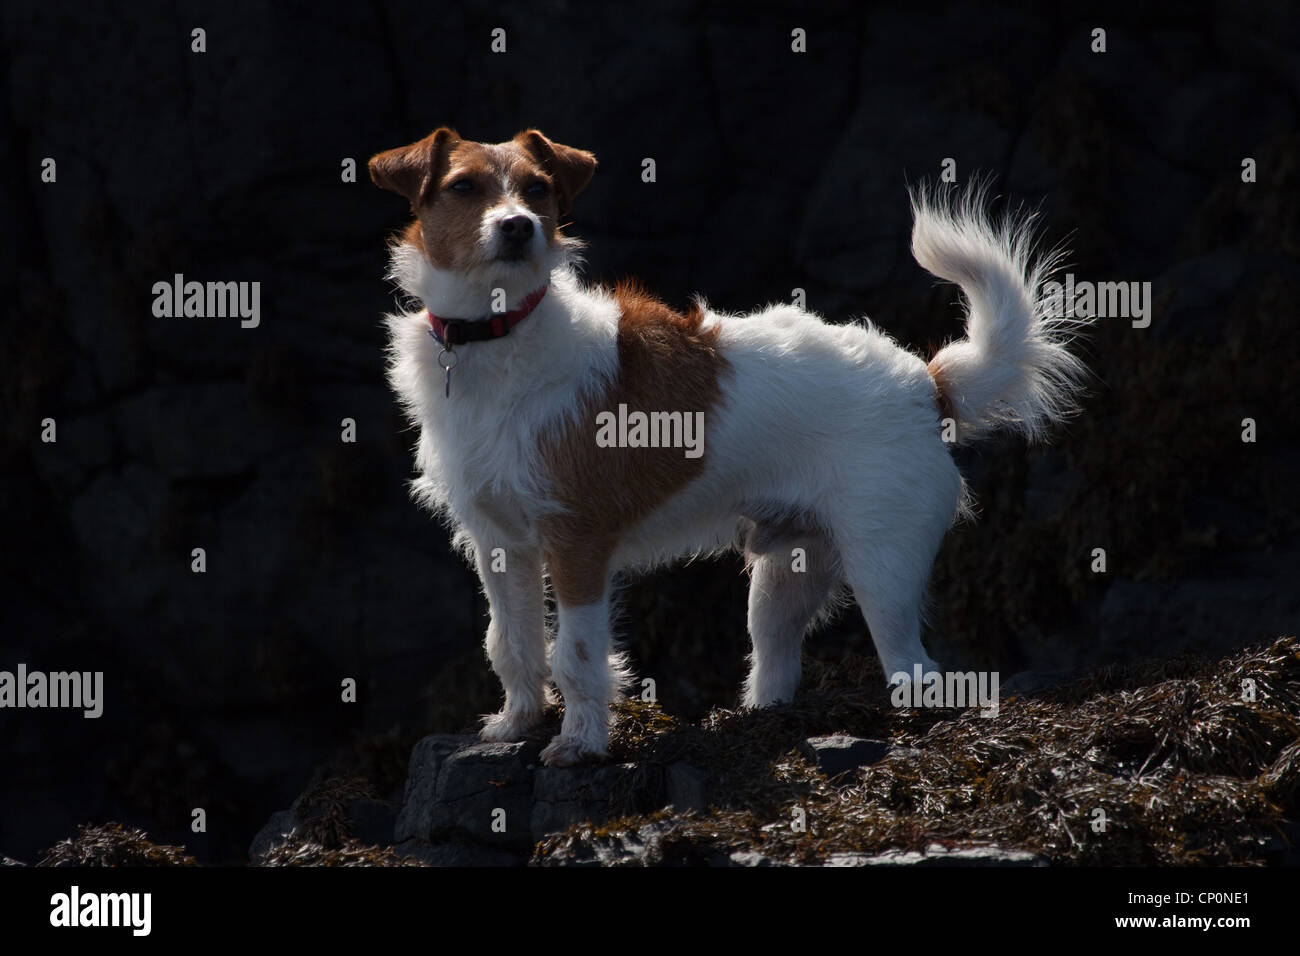 Jack Russell Terrier dog on a sea-weed covered rocky shore Stock Photo